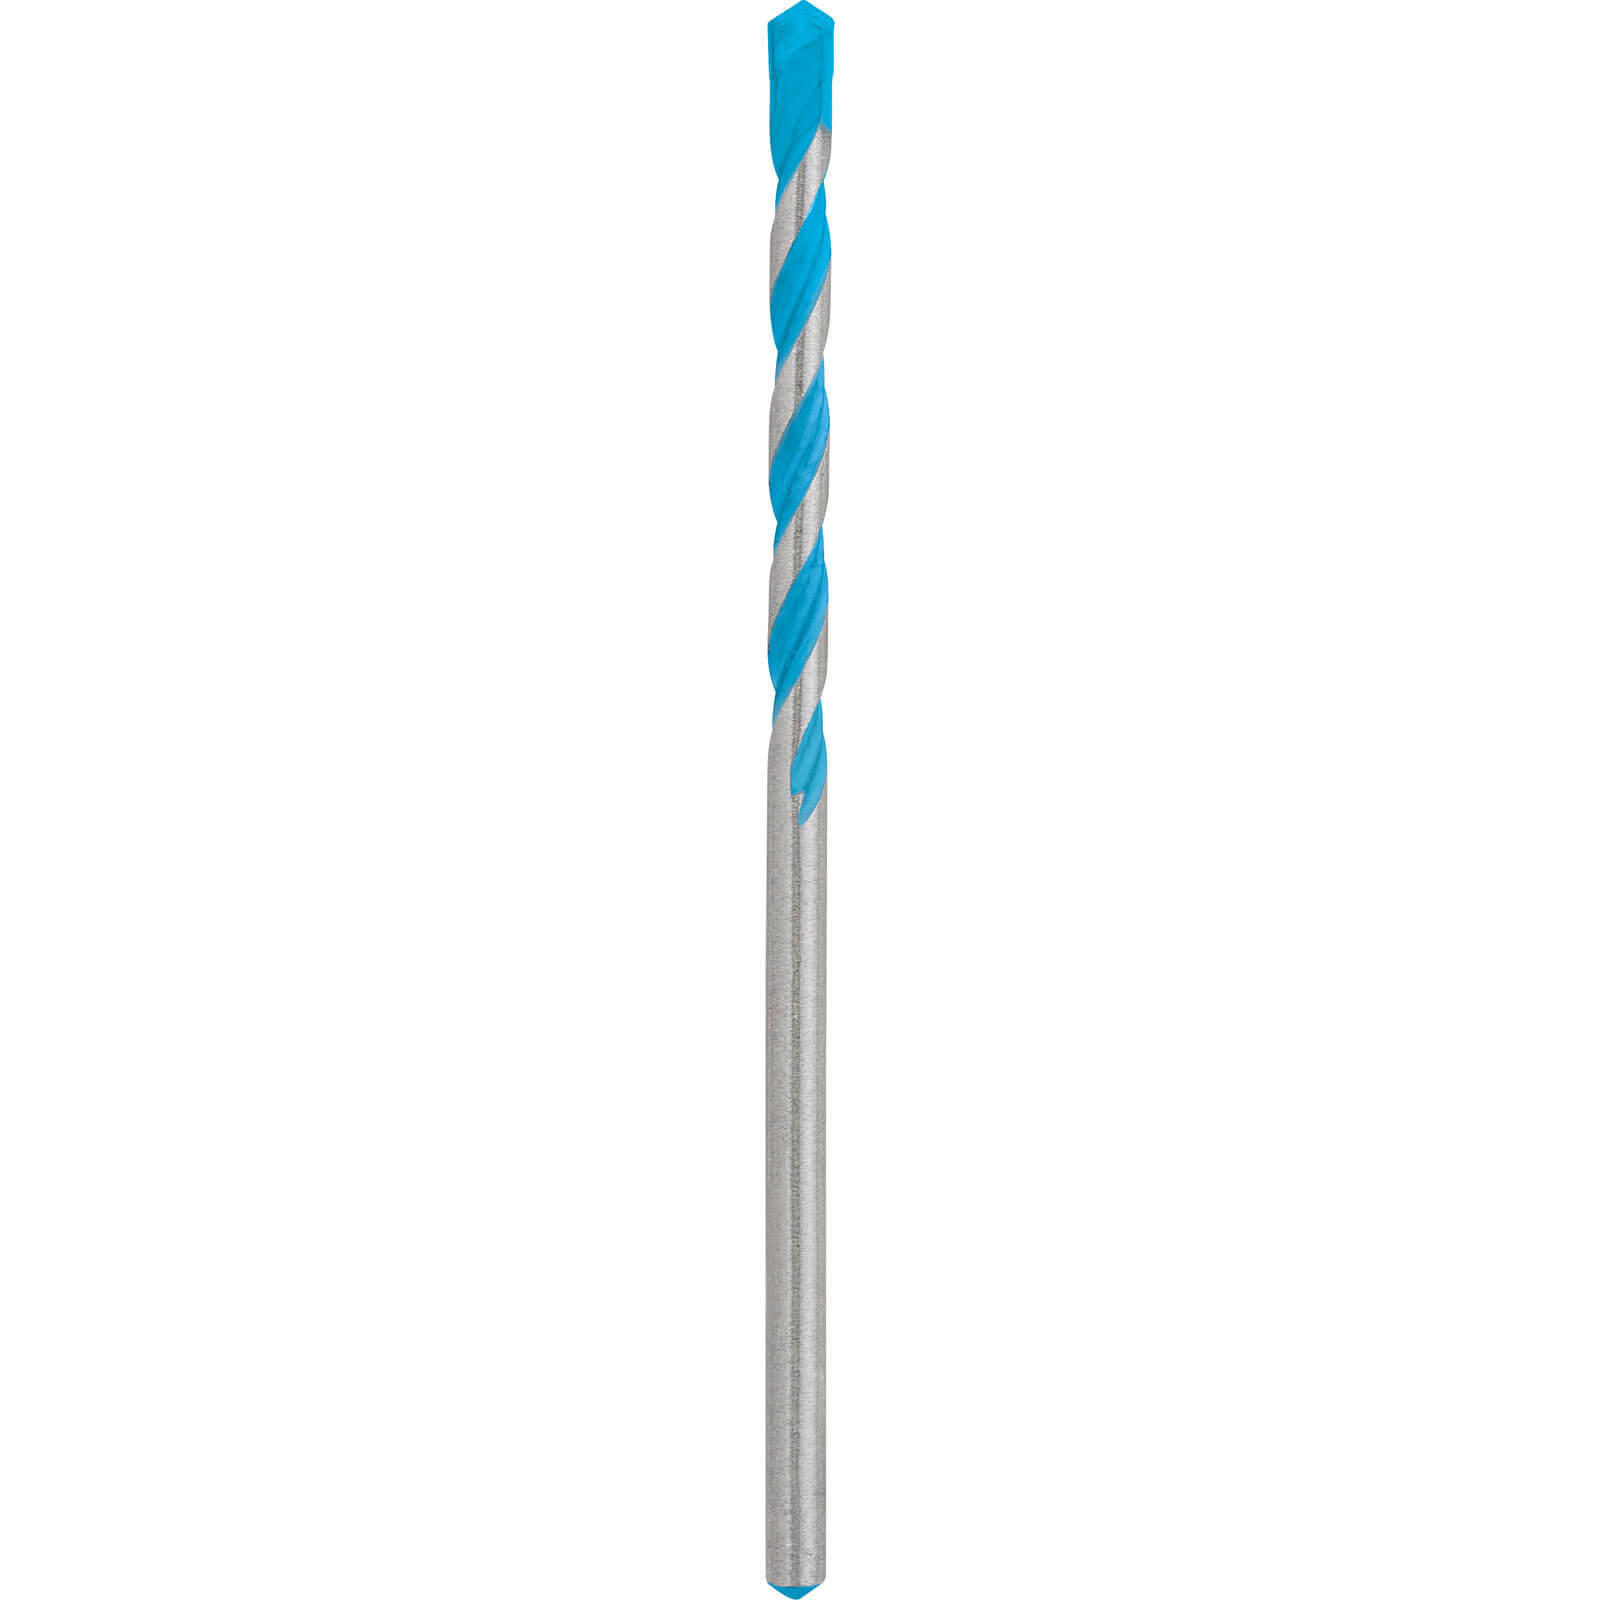 Photo of Bosch Expert Cyl-9 Multi Construction Drill Bit 8mm 250mm Pack Of 1